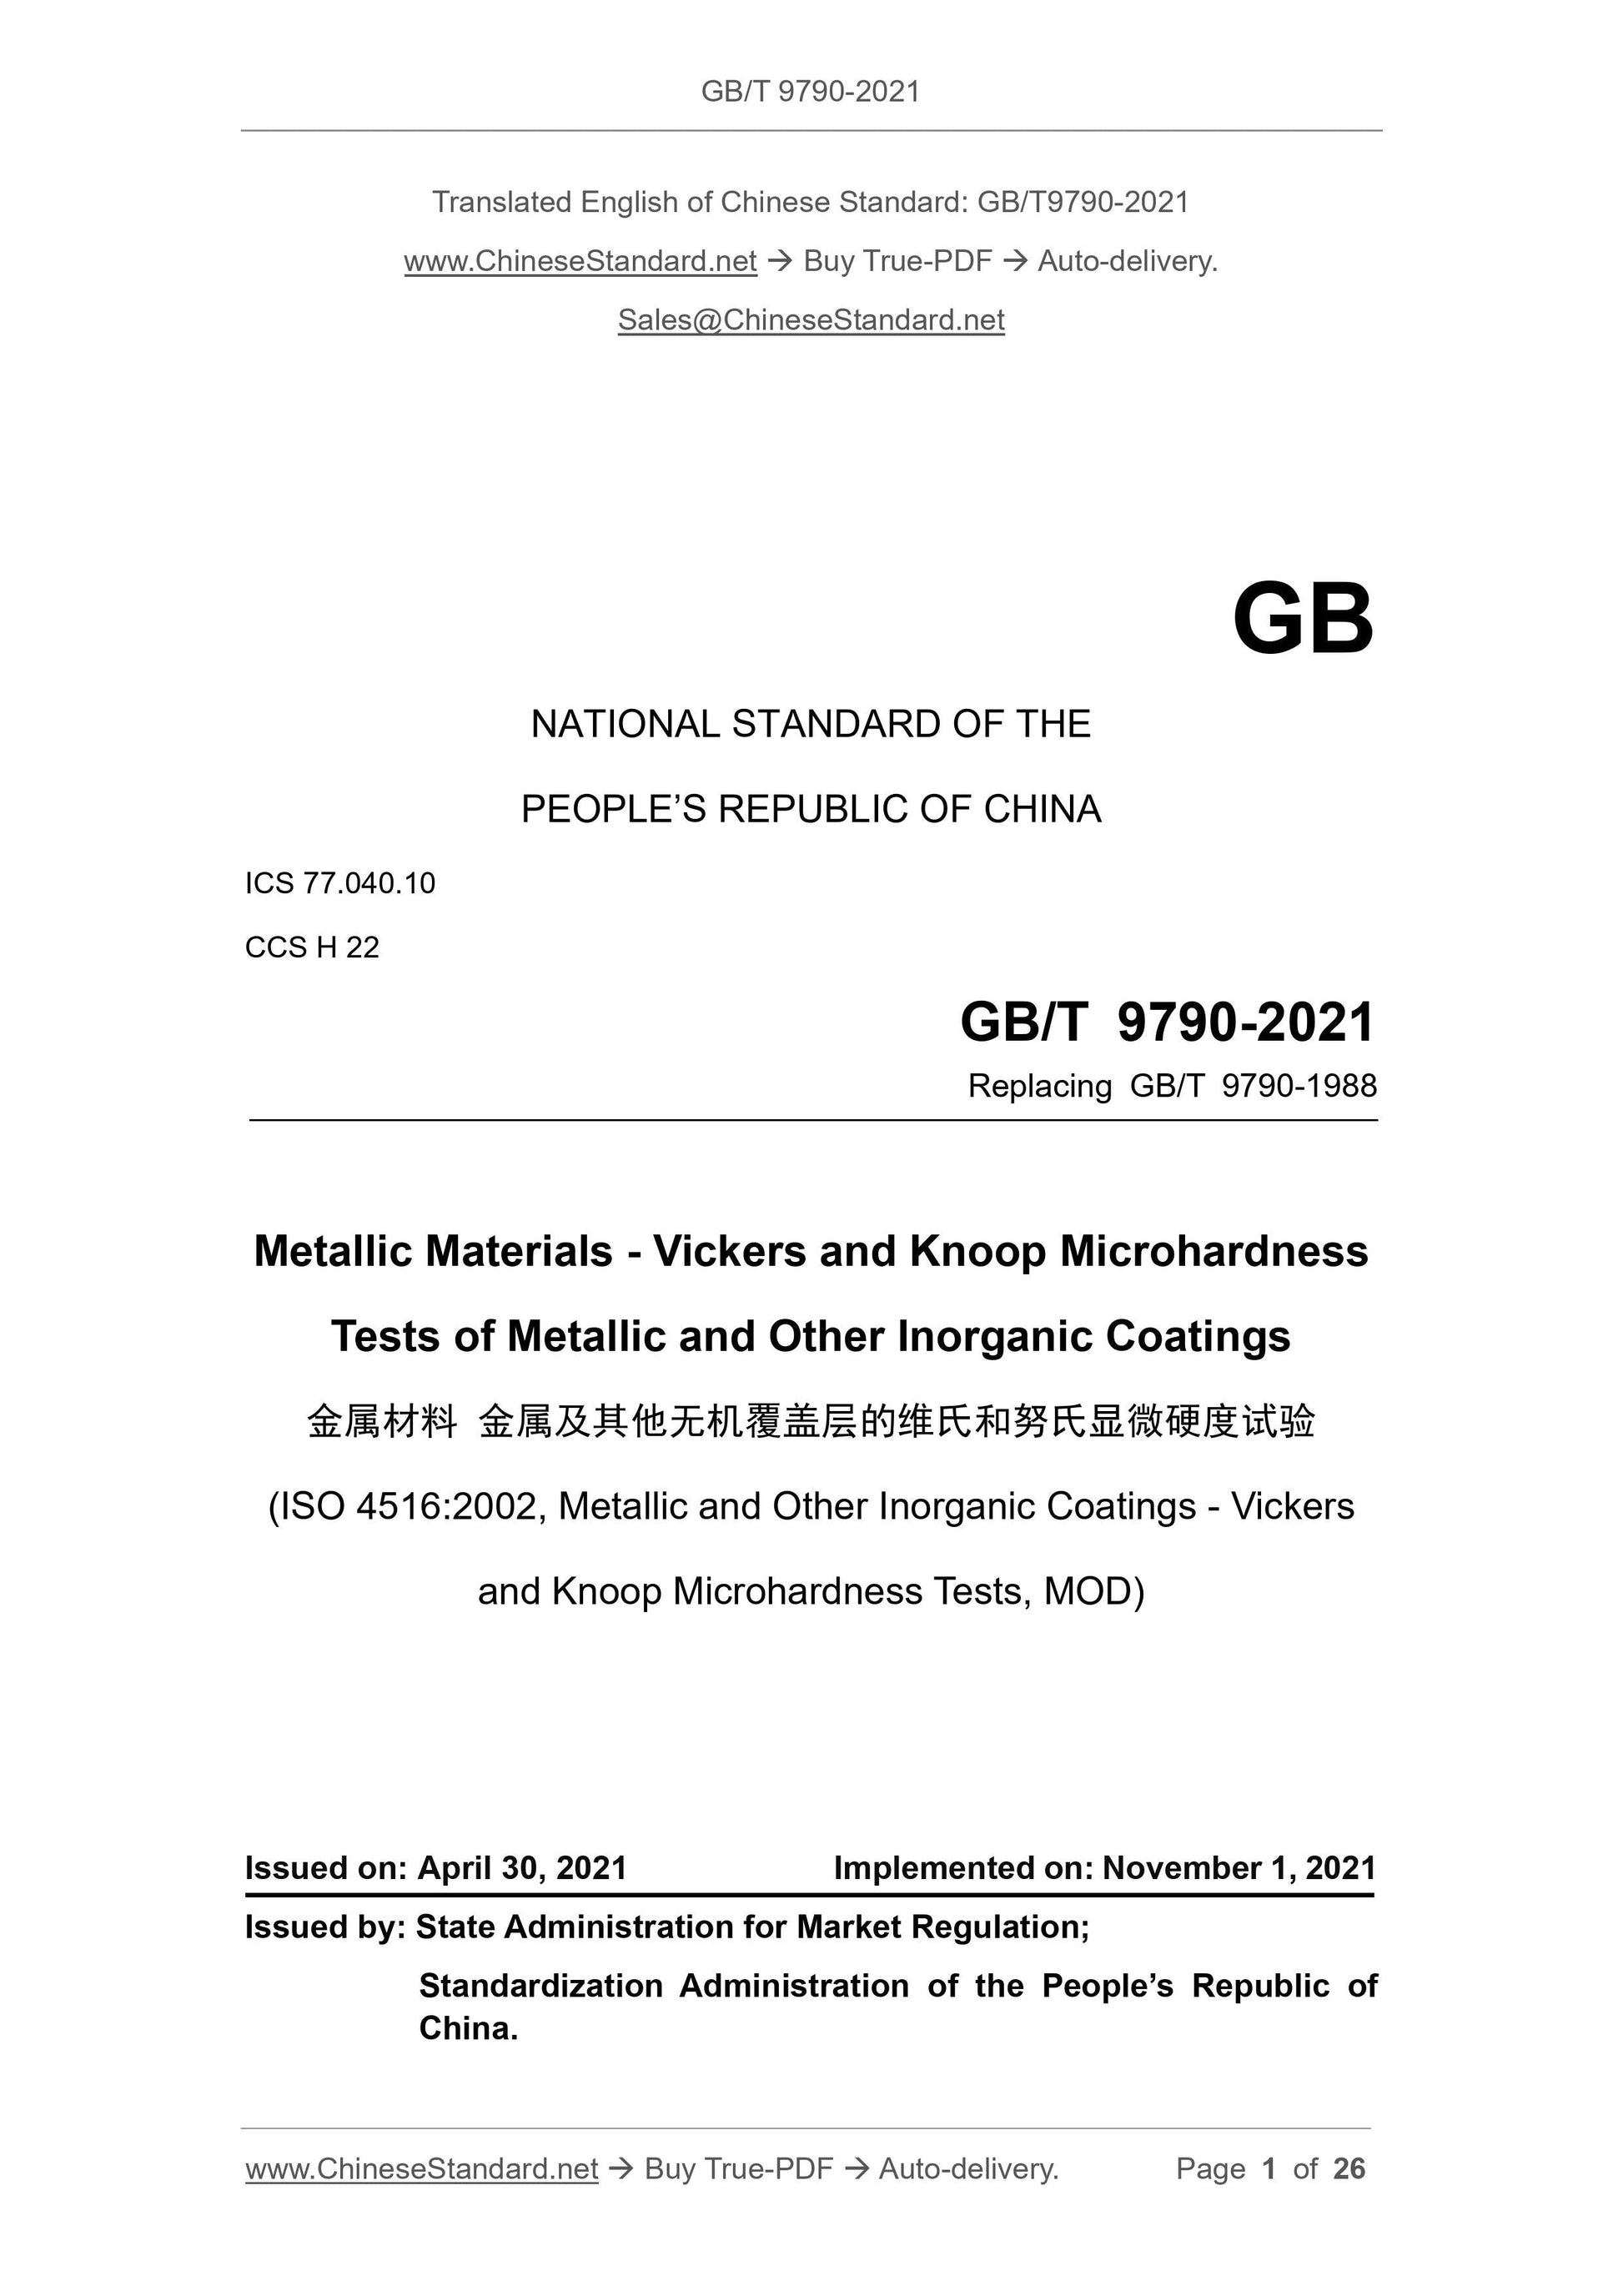 GB/T 9790-2021 Page 1